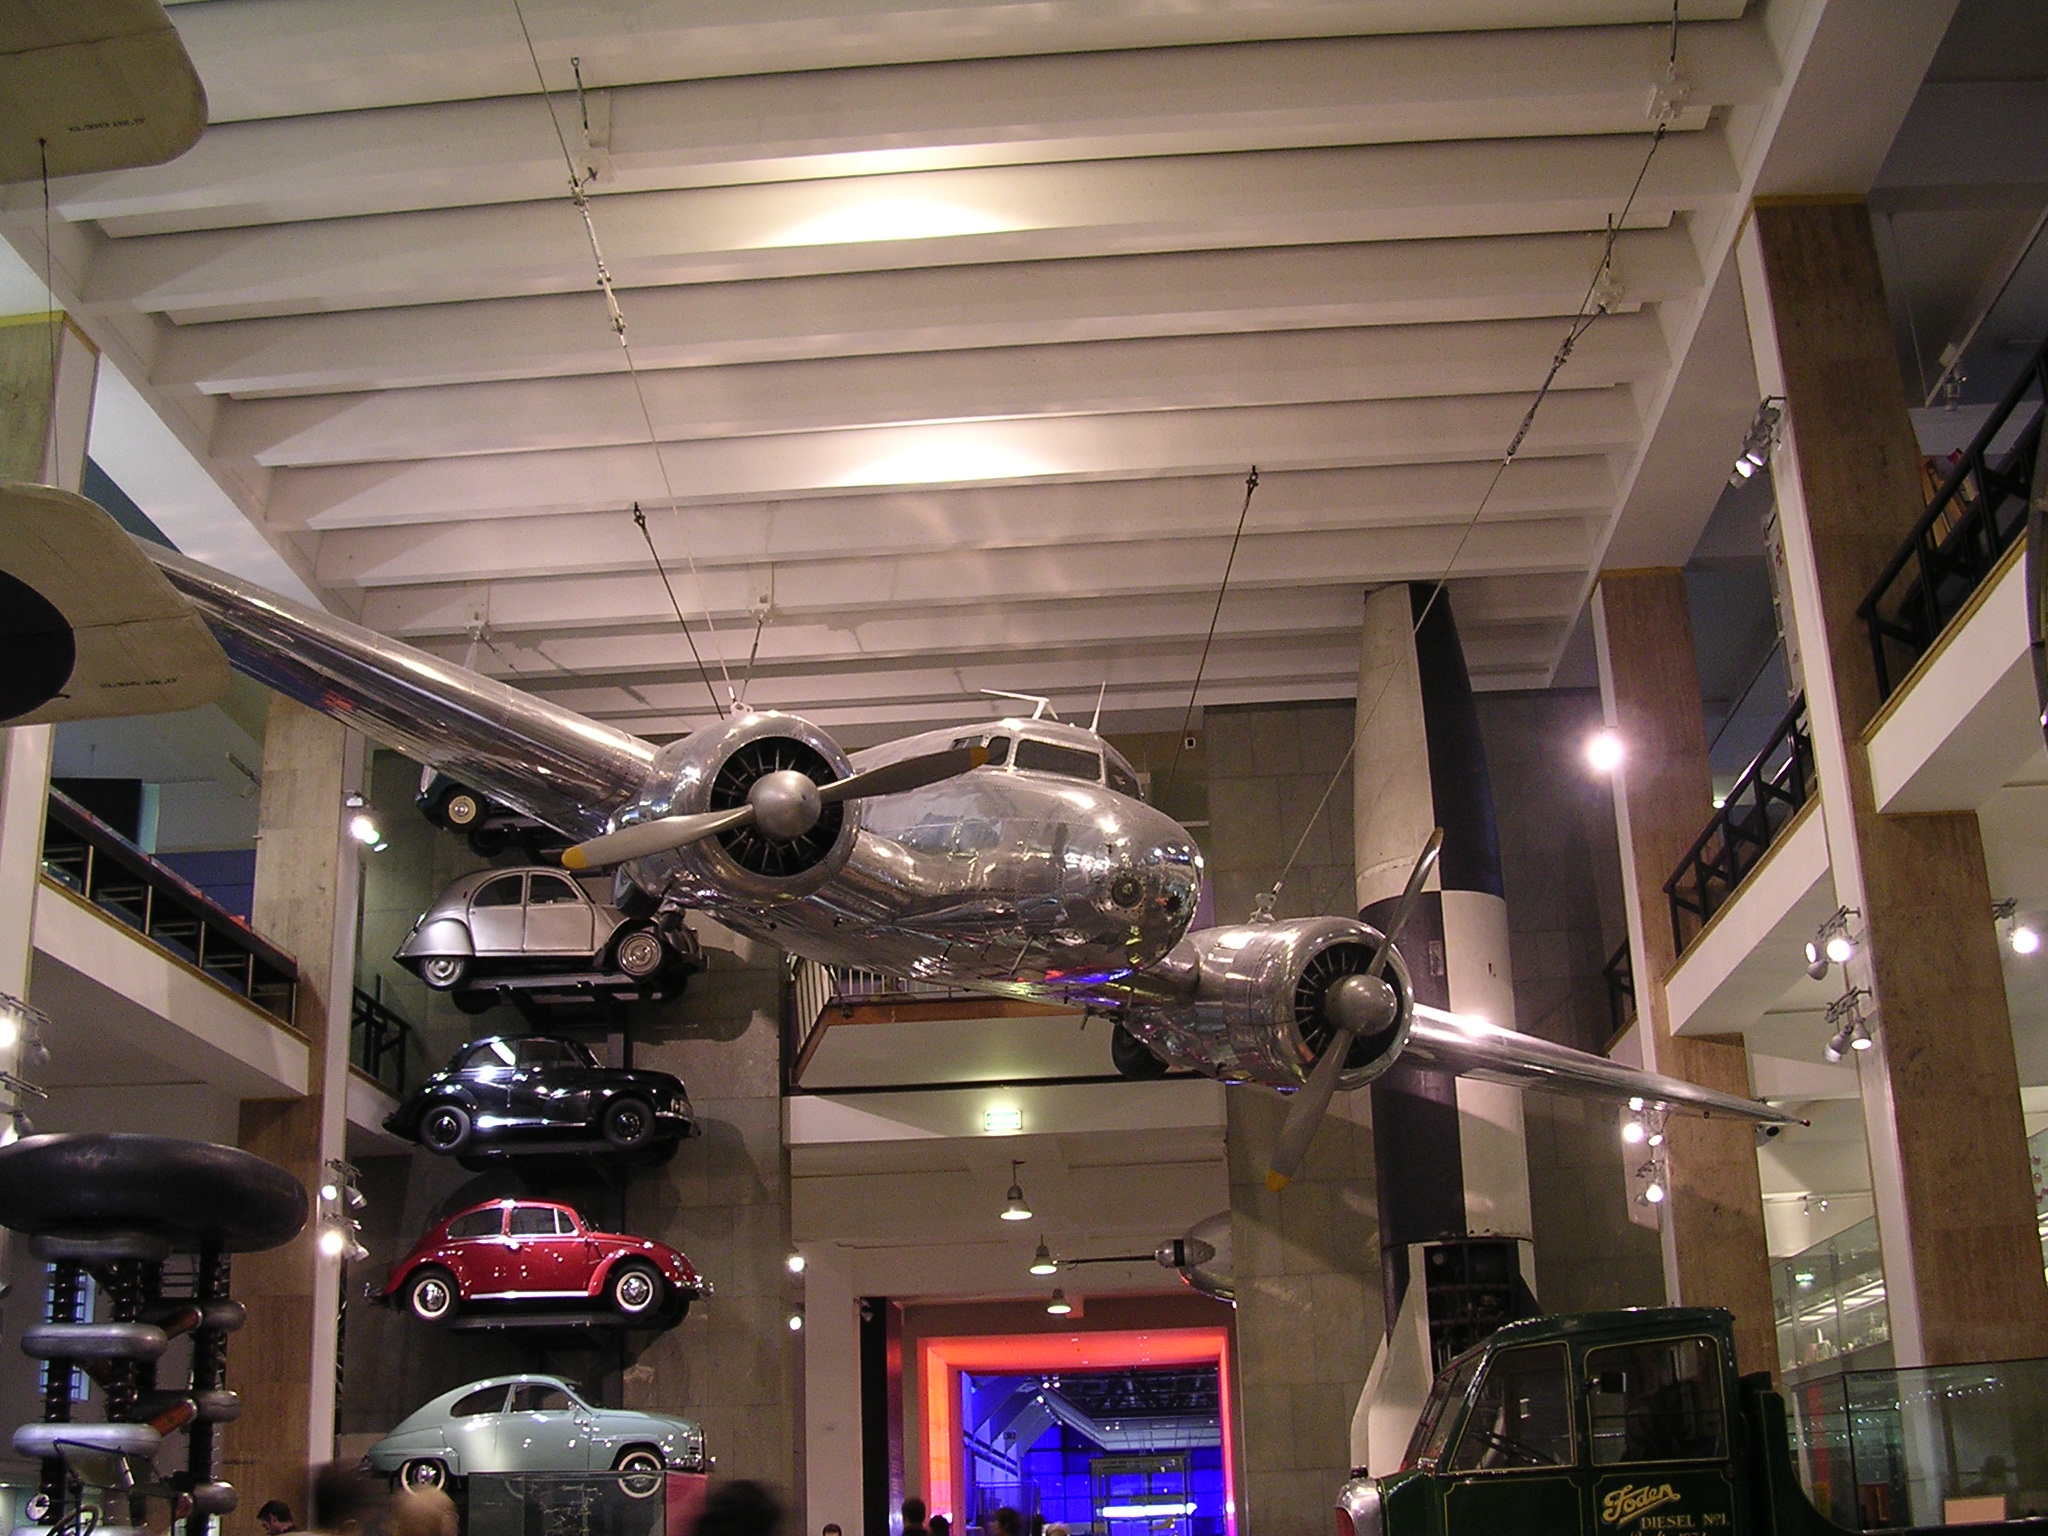 Plane_in_the_Science_Museum_of_London